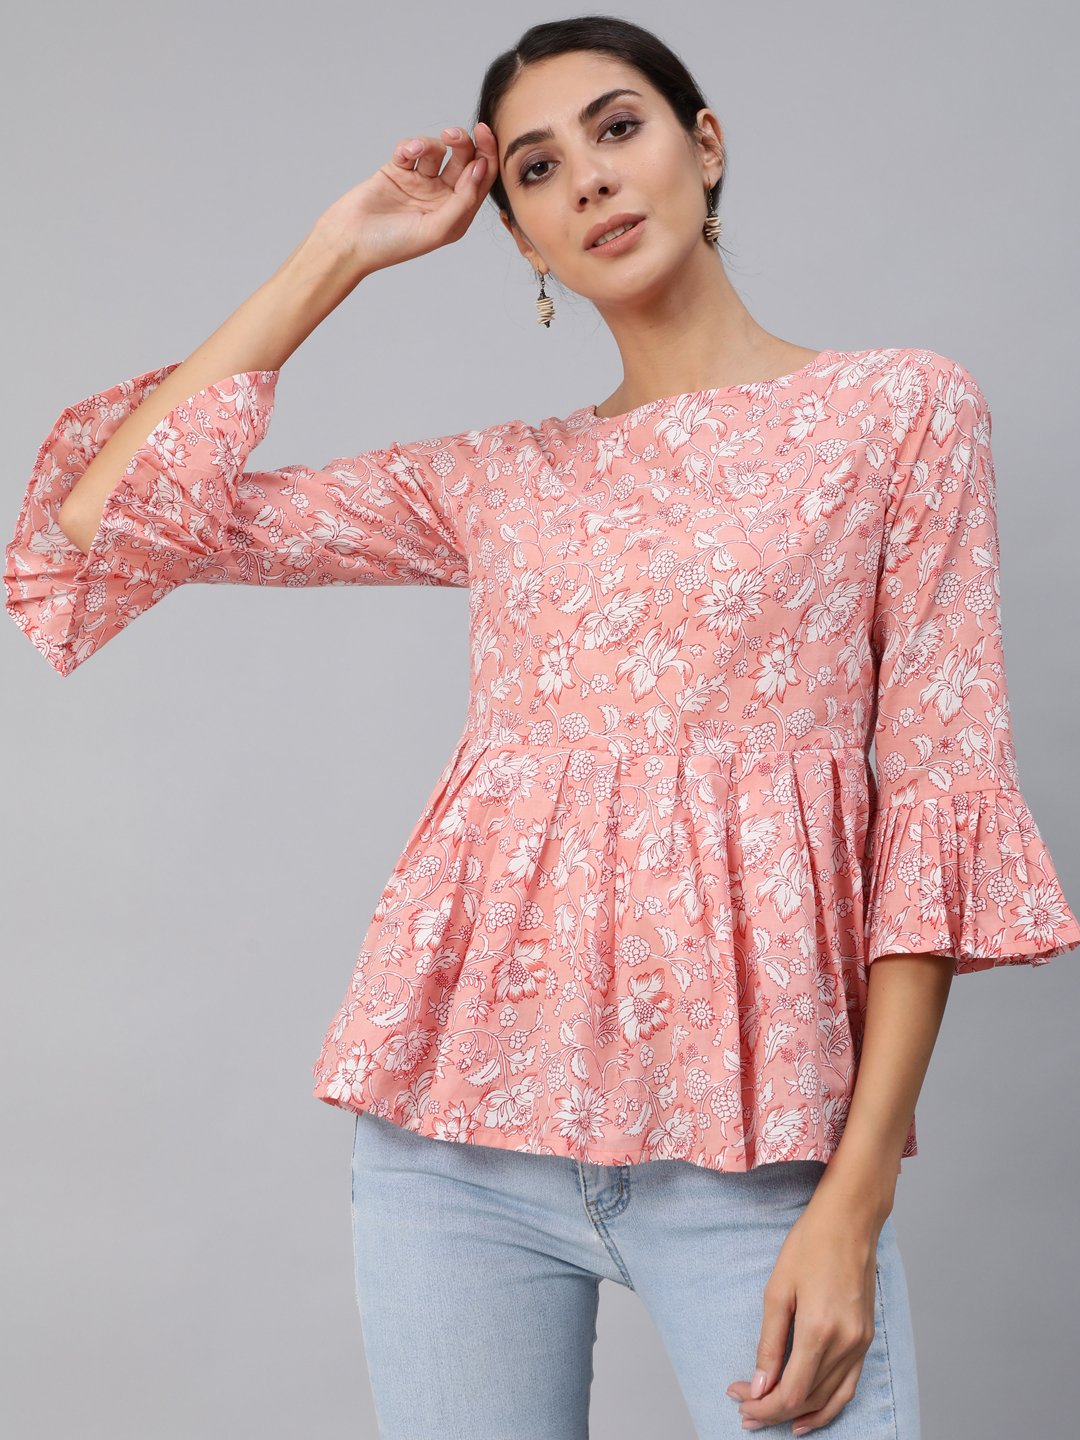 Women's Pink Floral Printed Top With Three Quarter Flared Sleeves - Nayo Clothing